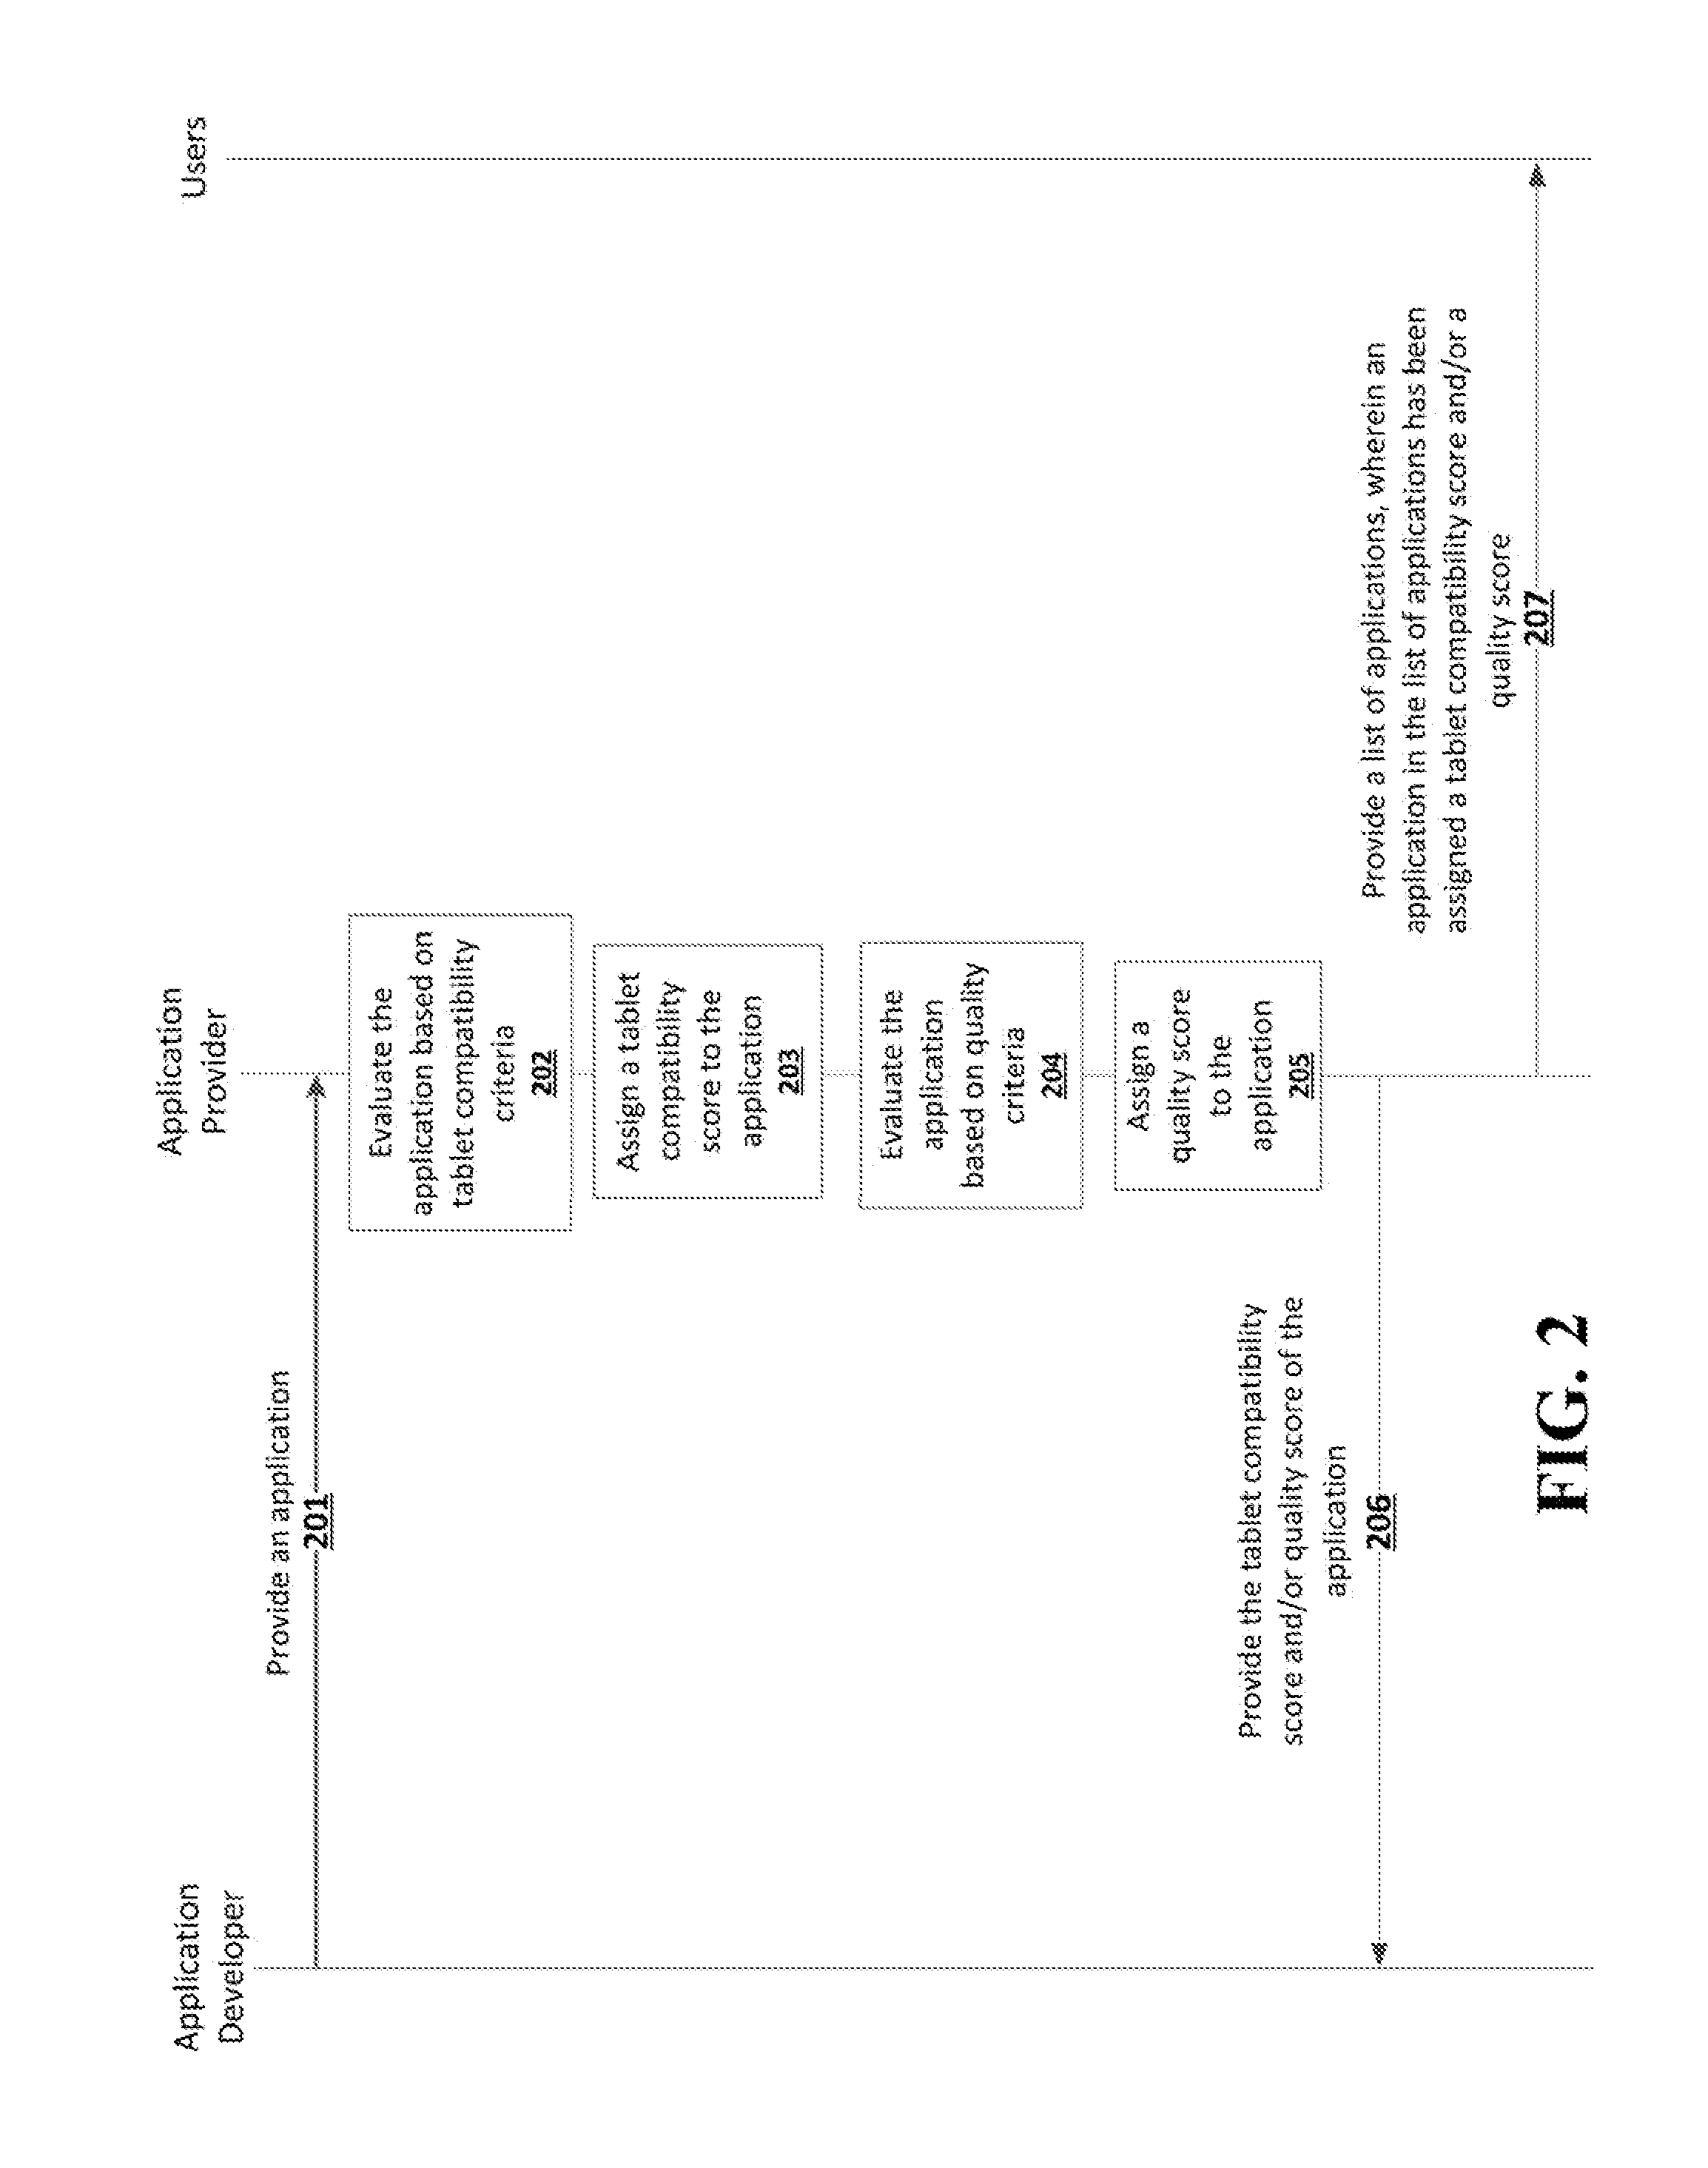 System for assessing an application for tablet compatibility and quality